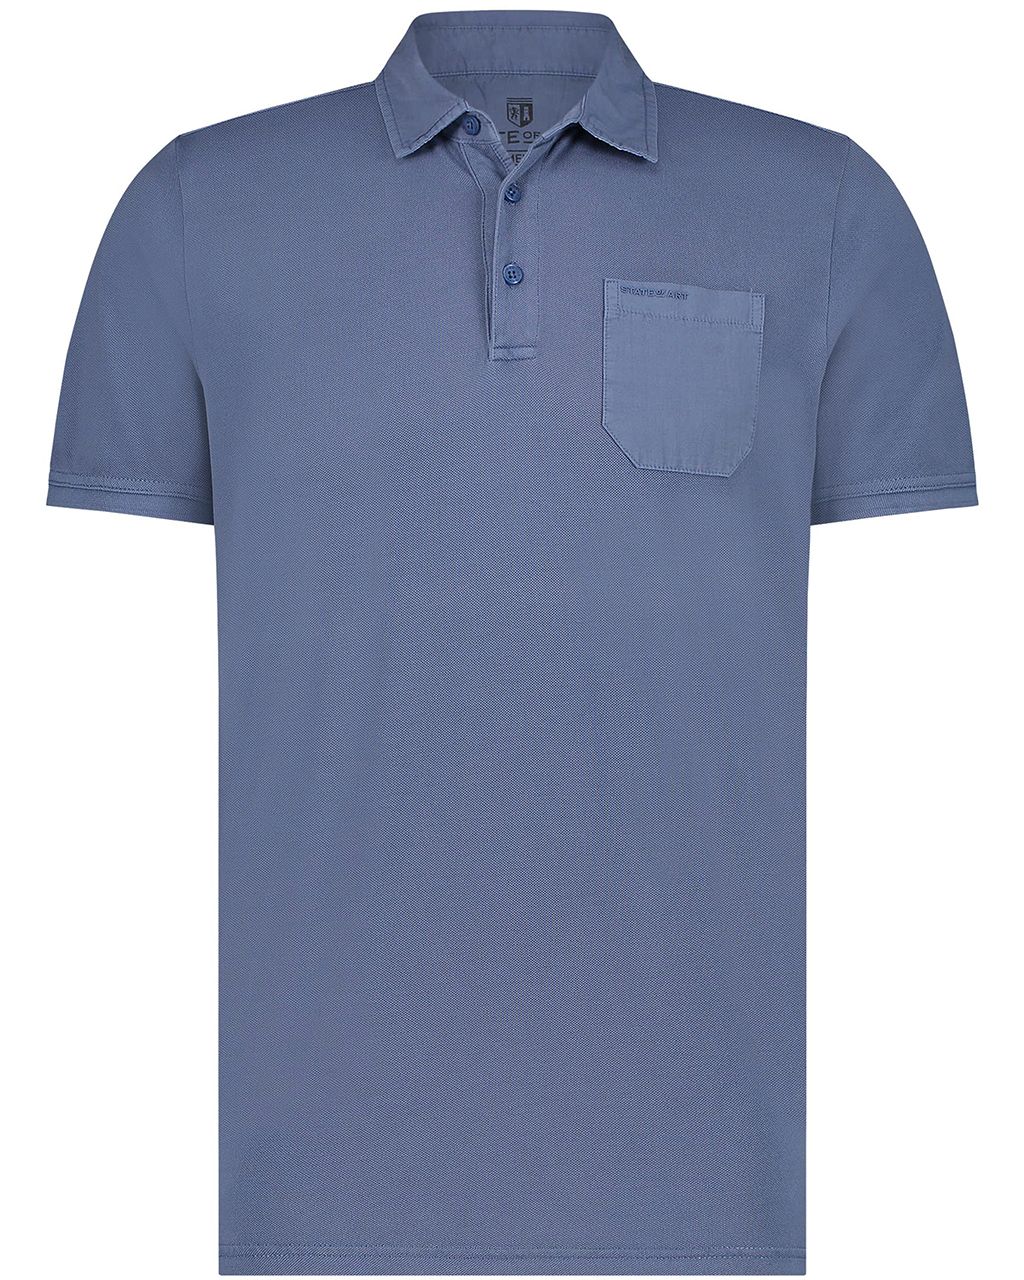 State of Art Polo KM Donker blauw 075922-001-4XL